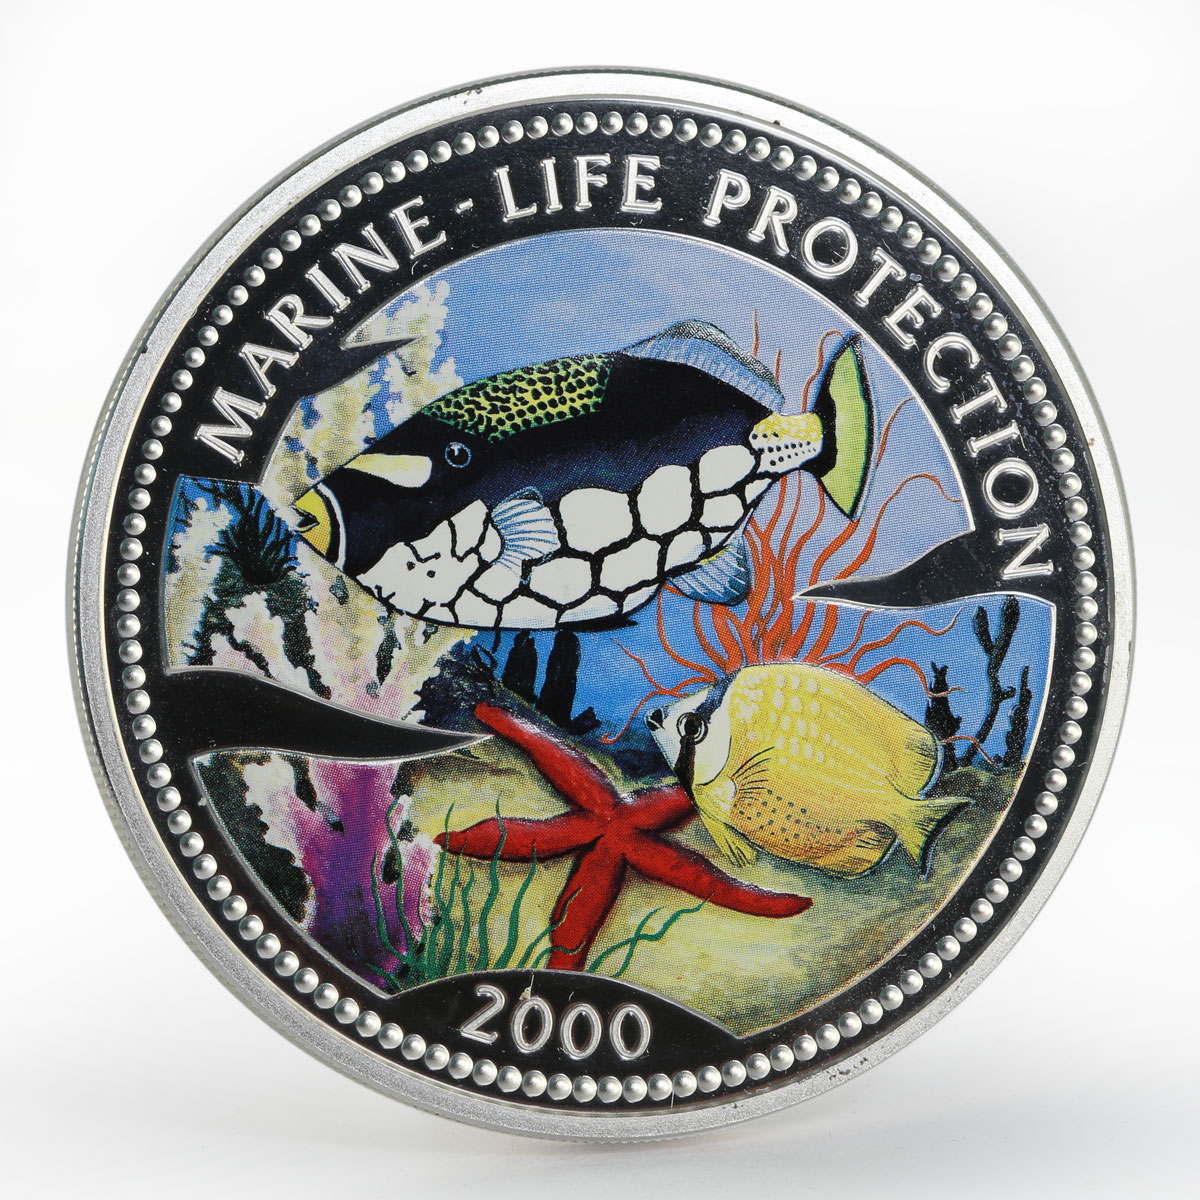 Congo 50 francs Fish Marine Life Protection colored proof silver coin 2000